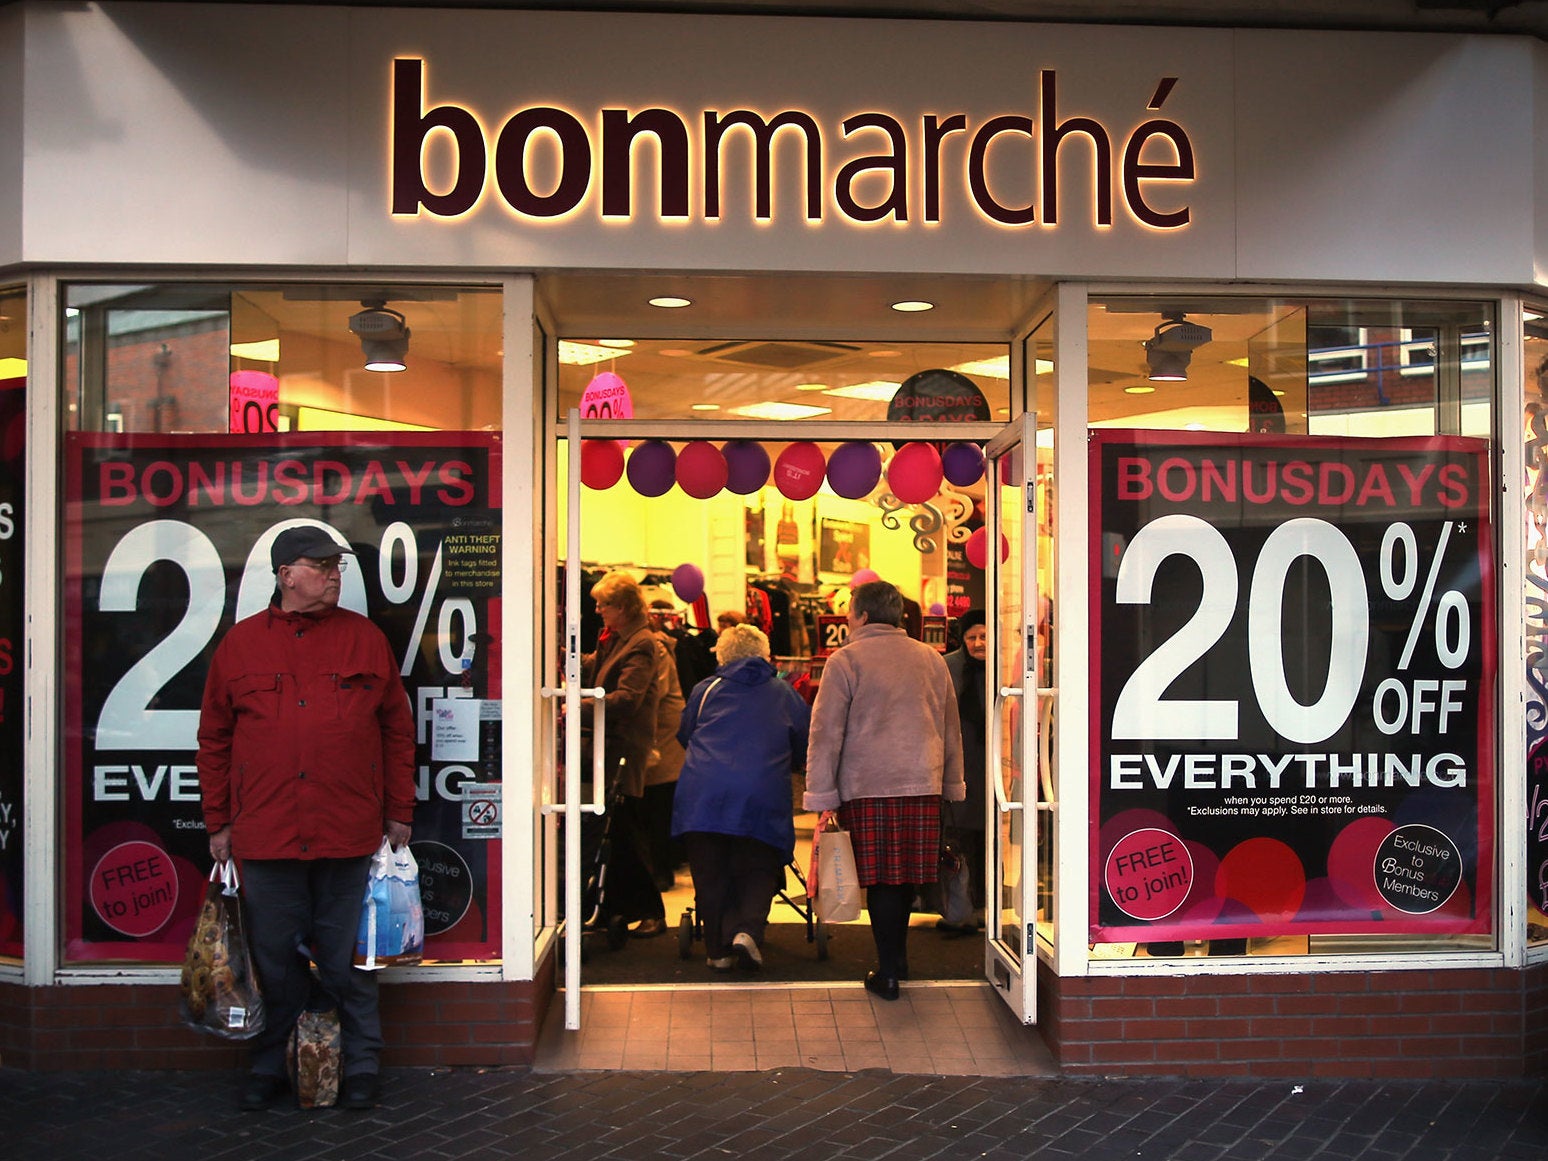 Bonmarche’s announcement is the latest in a dire week for UK high streets that has seen Sir Philip Green’s Arcadia call in the administrators and Debenhams enter liquidation